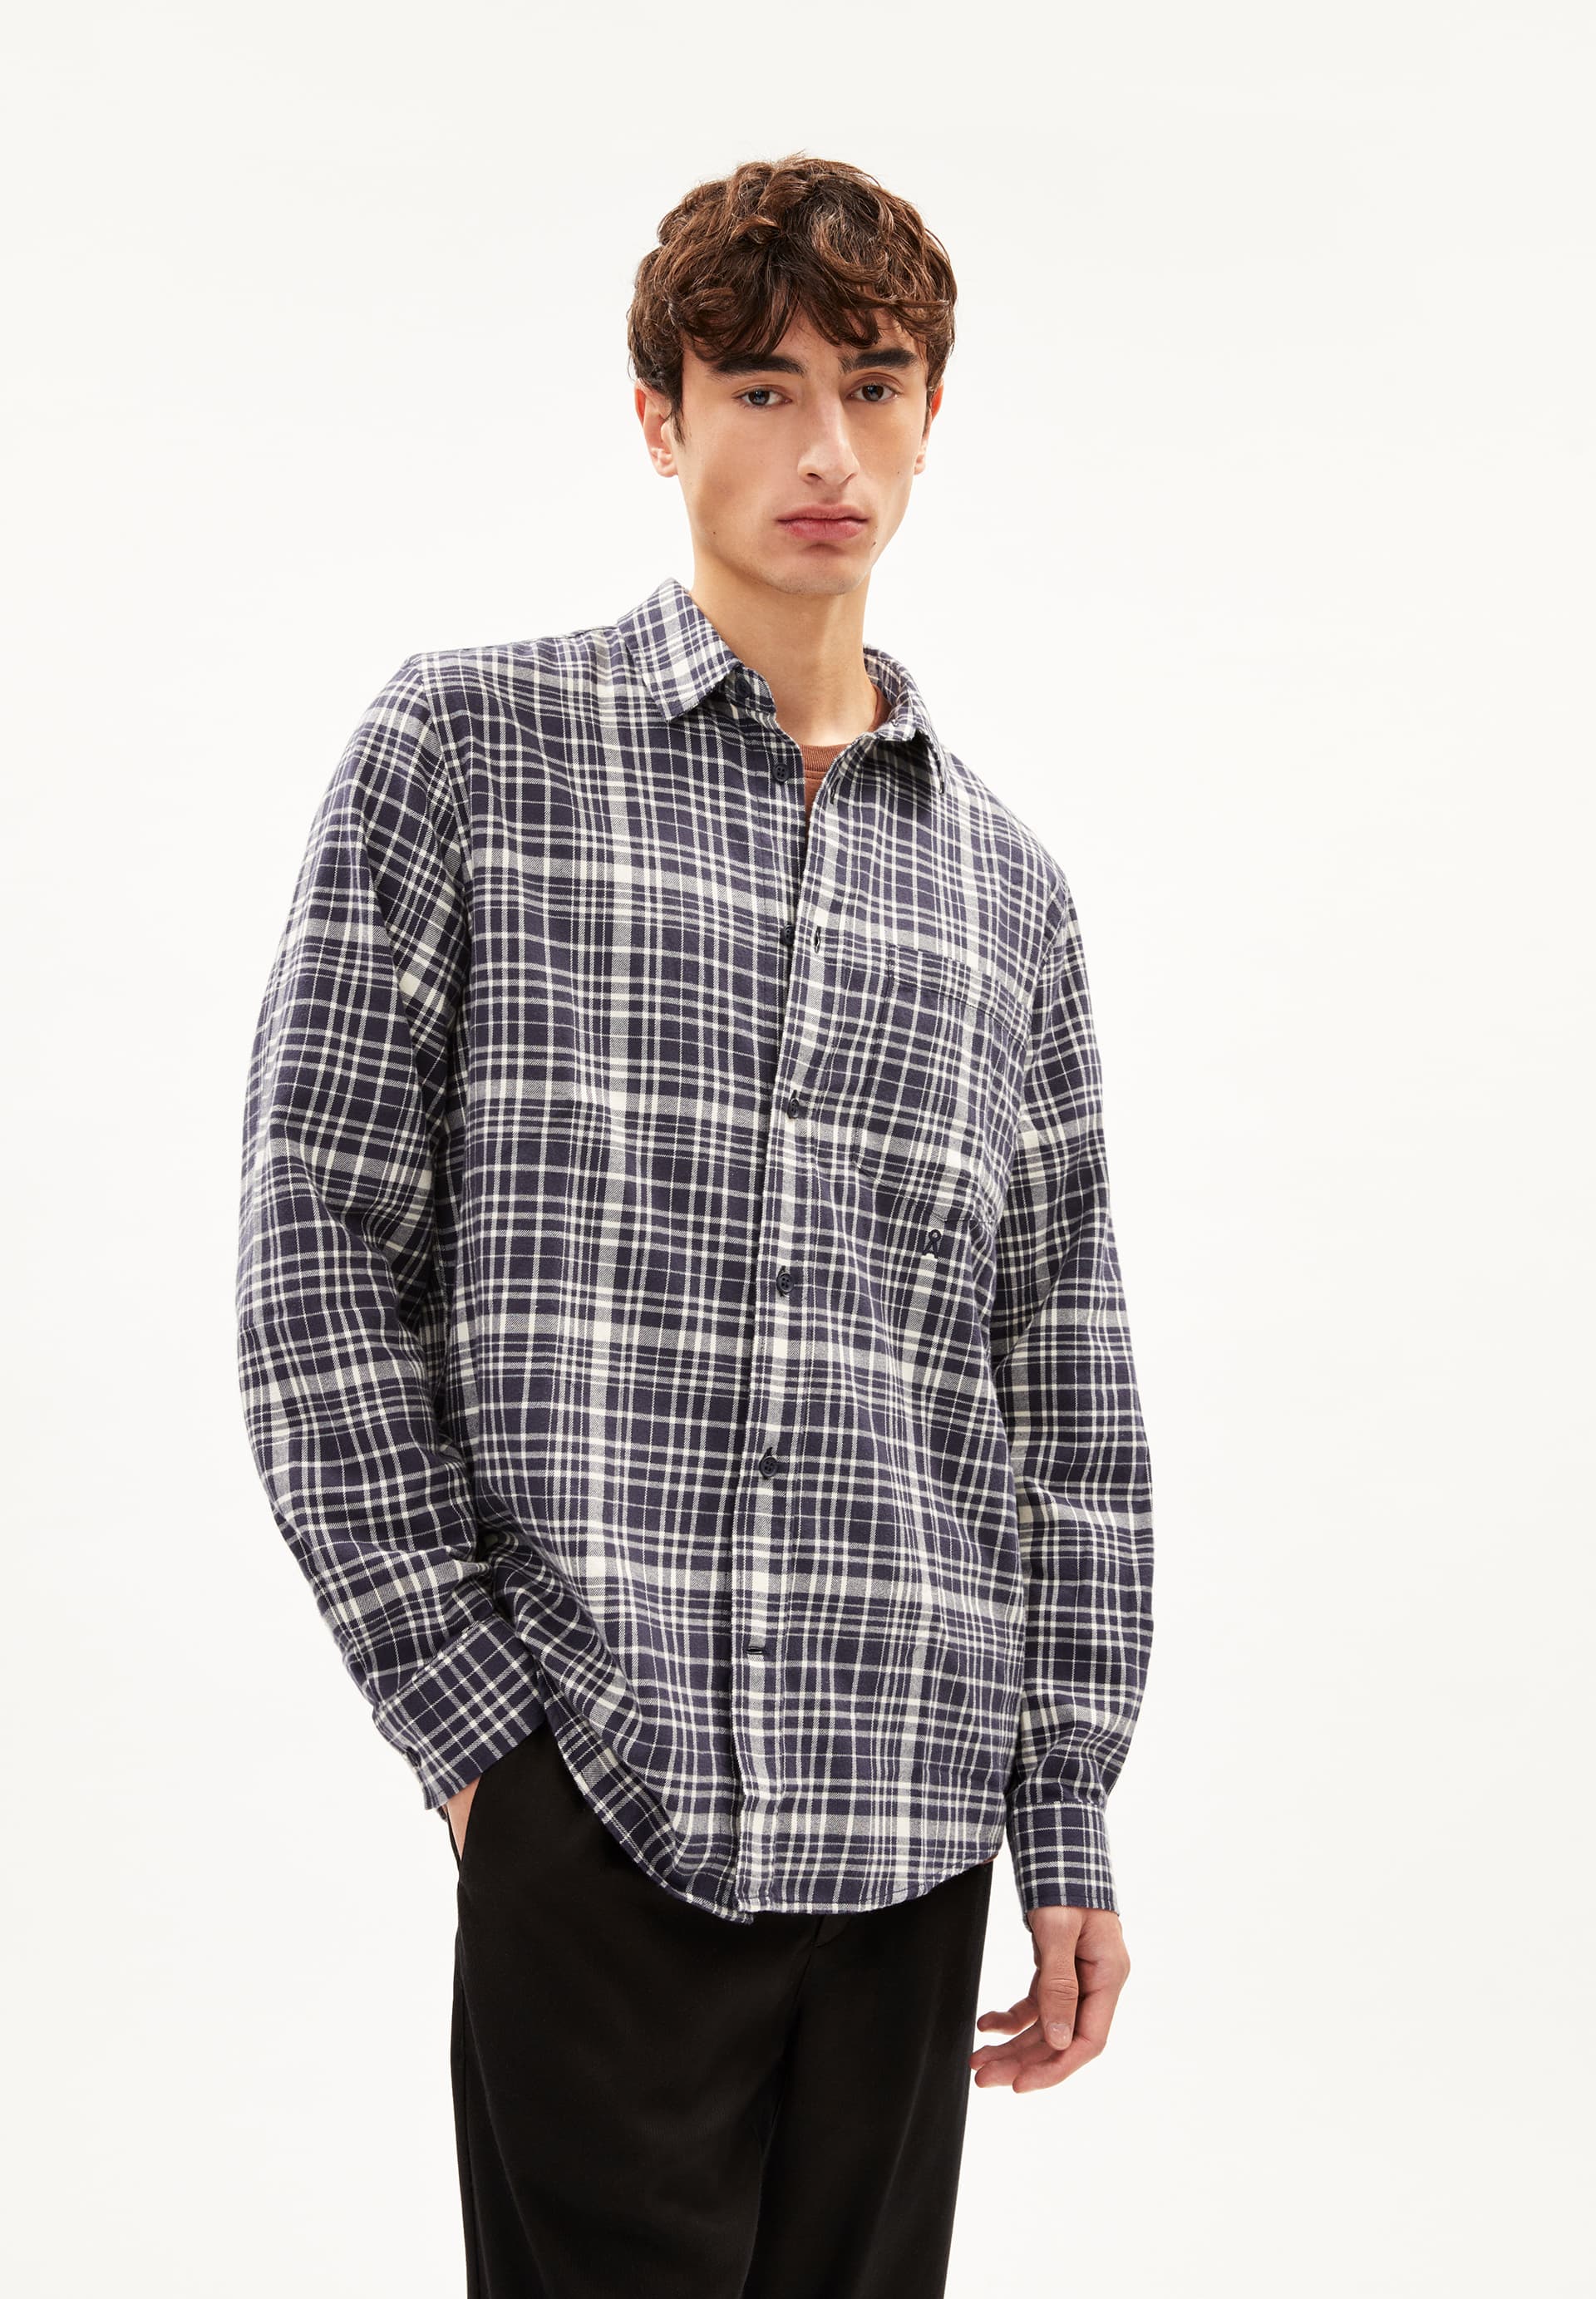 AARSENIO Flannel Shirt Relaxed Fit made of Organic Cotton